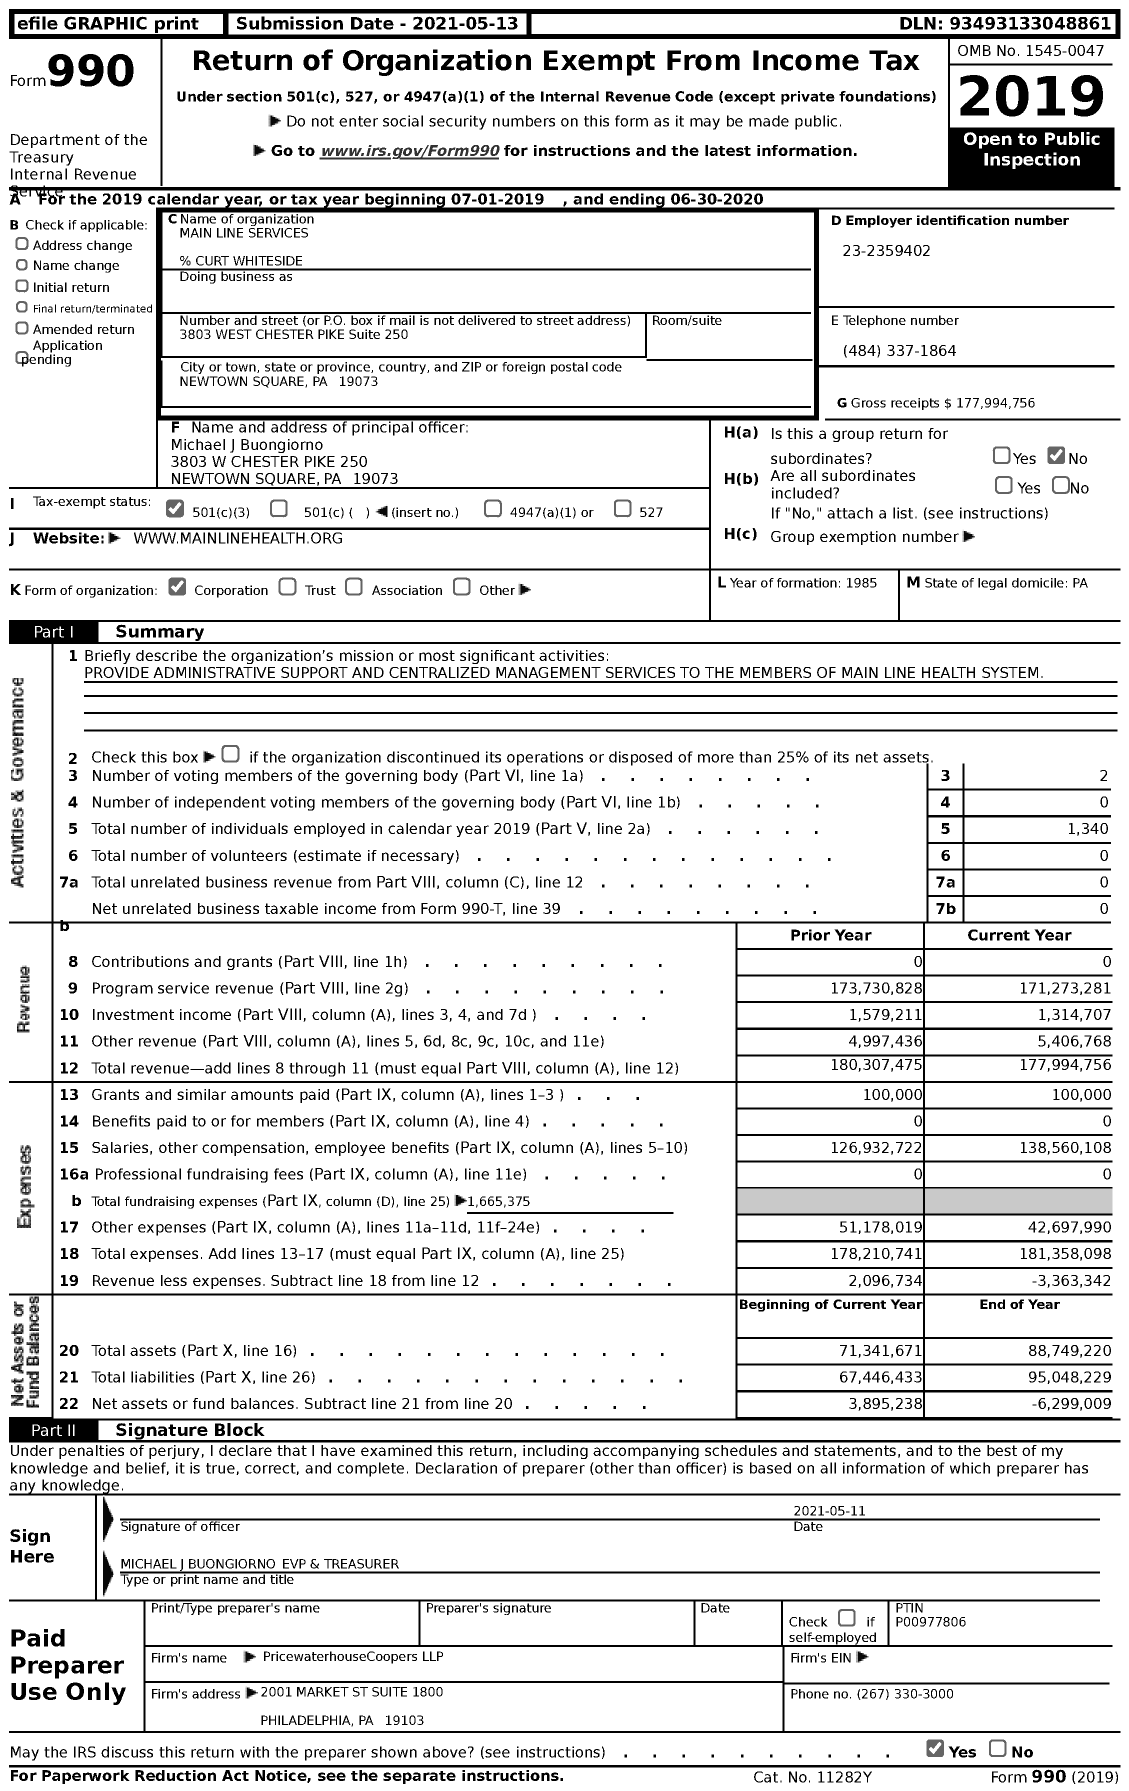 Image of first page of 2019 Form 990 for Main Line HealthCare (MLHC)